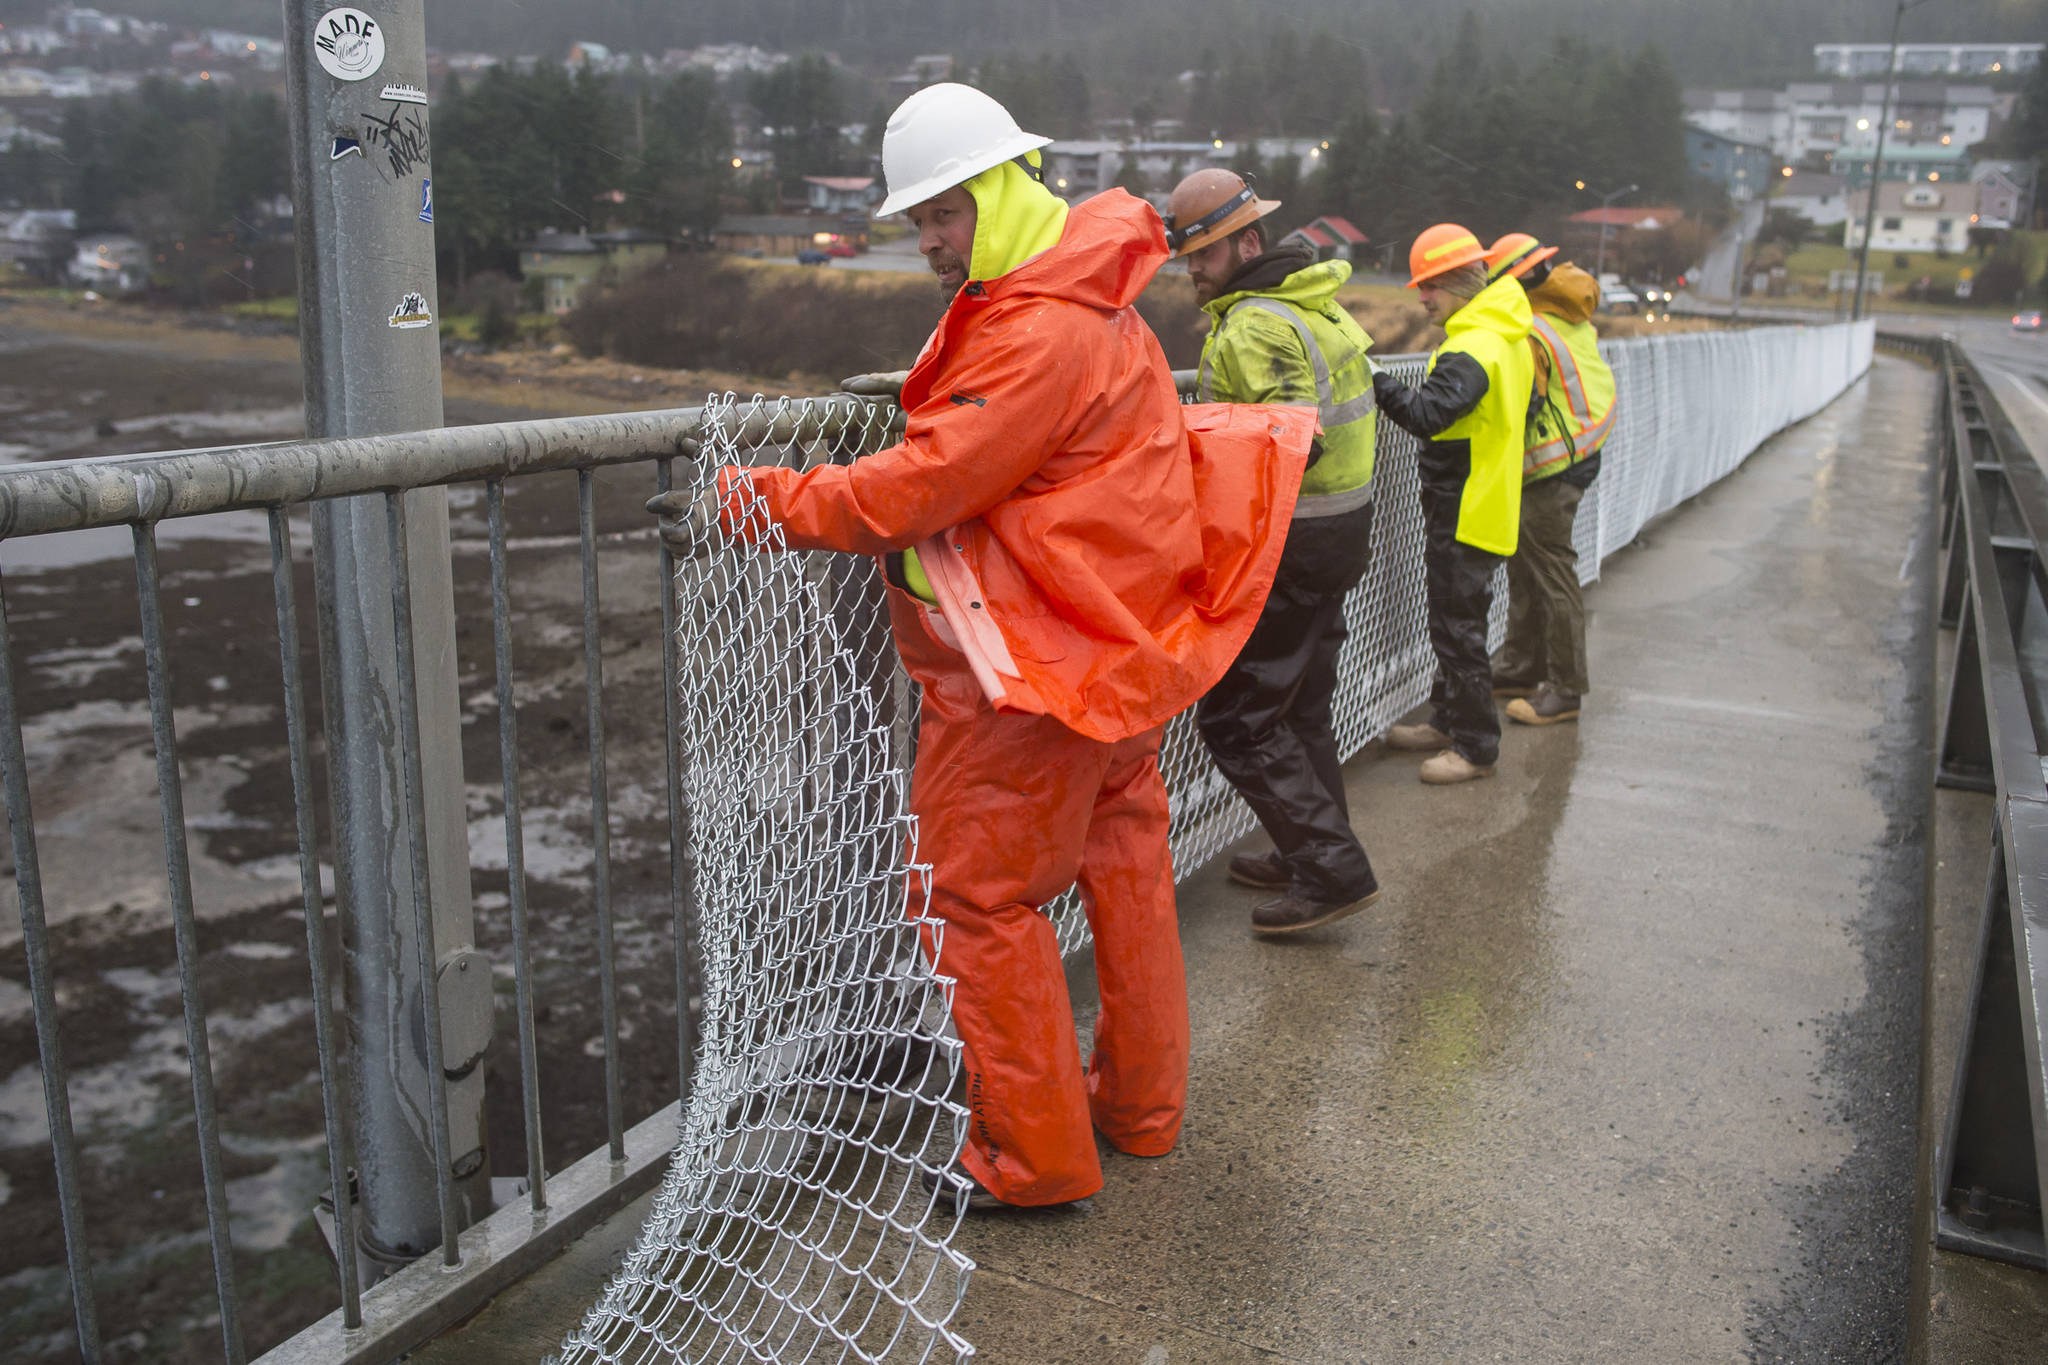 A crew from the Department of Transportation and Public Facilities installs chain-link fencing along the pedestrian walkway over the Douglas Bridge on Monday, Nov. 26, 2018. (Michael Penn | Juneau Empire)